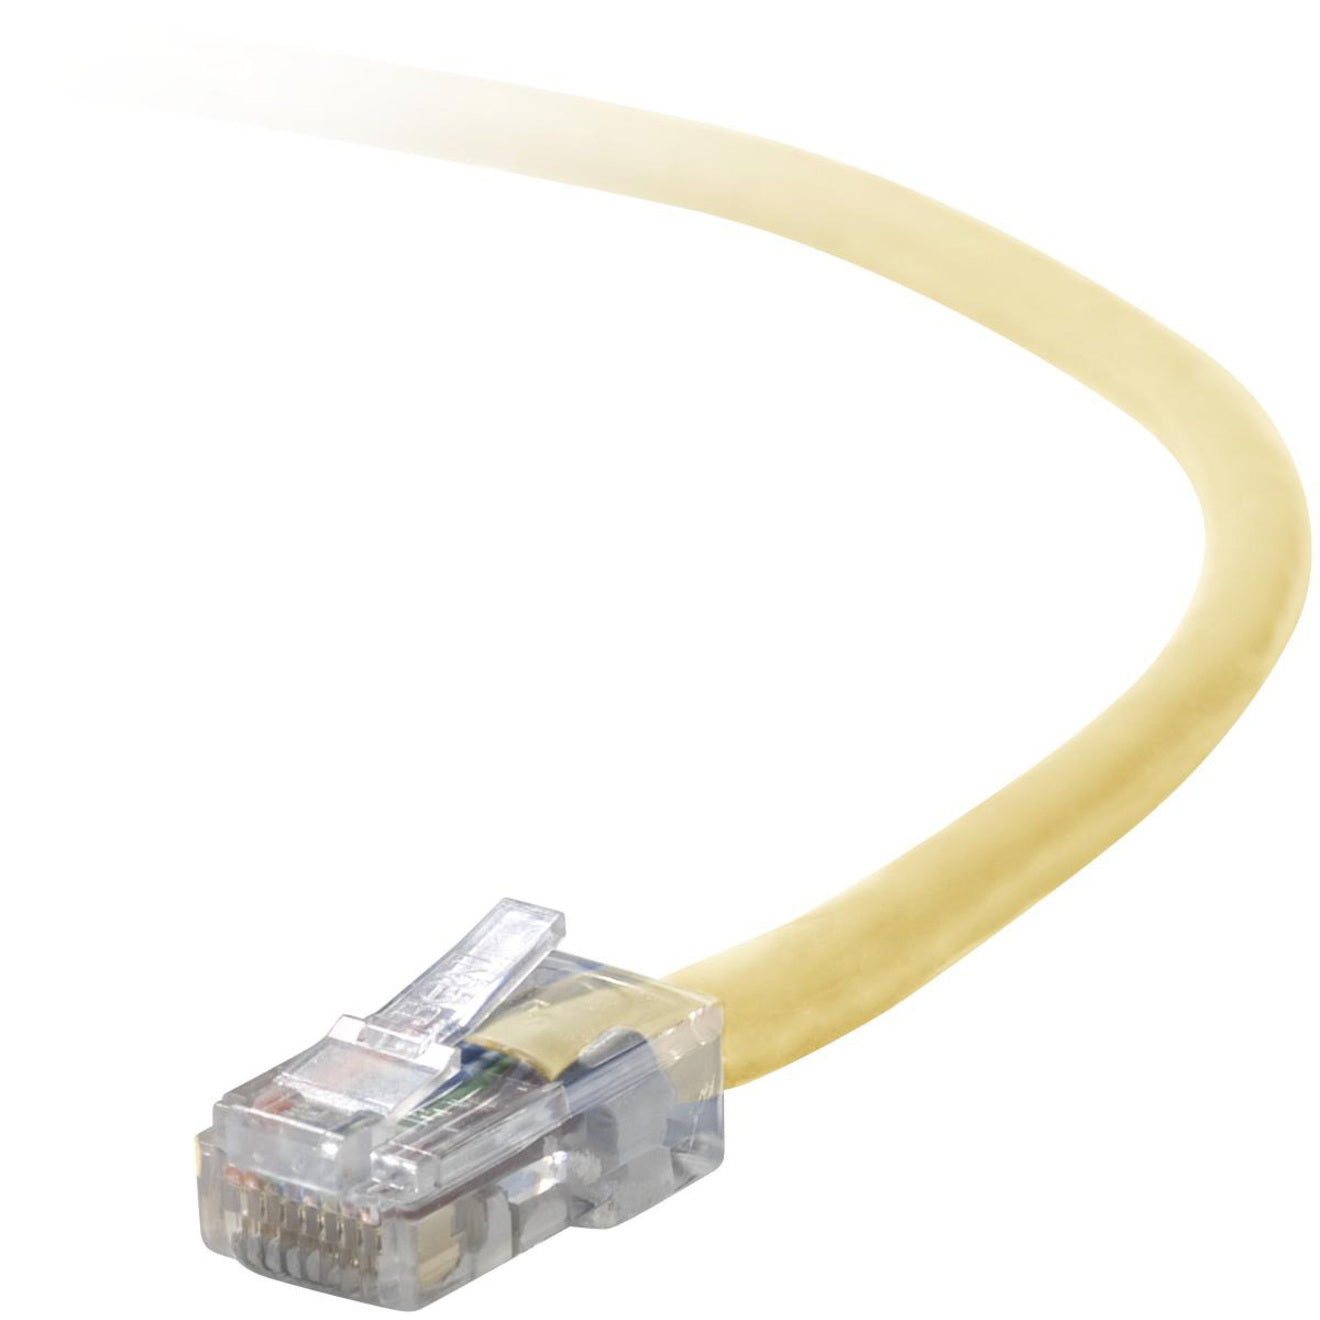 Belkin A3L791-01-YLW RJ45 Category 5e Patch Cable, 1 ft, Copper Conductor, Yellow